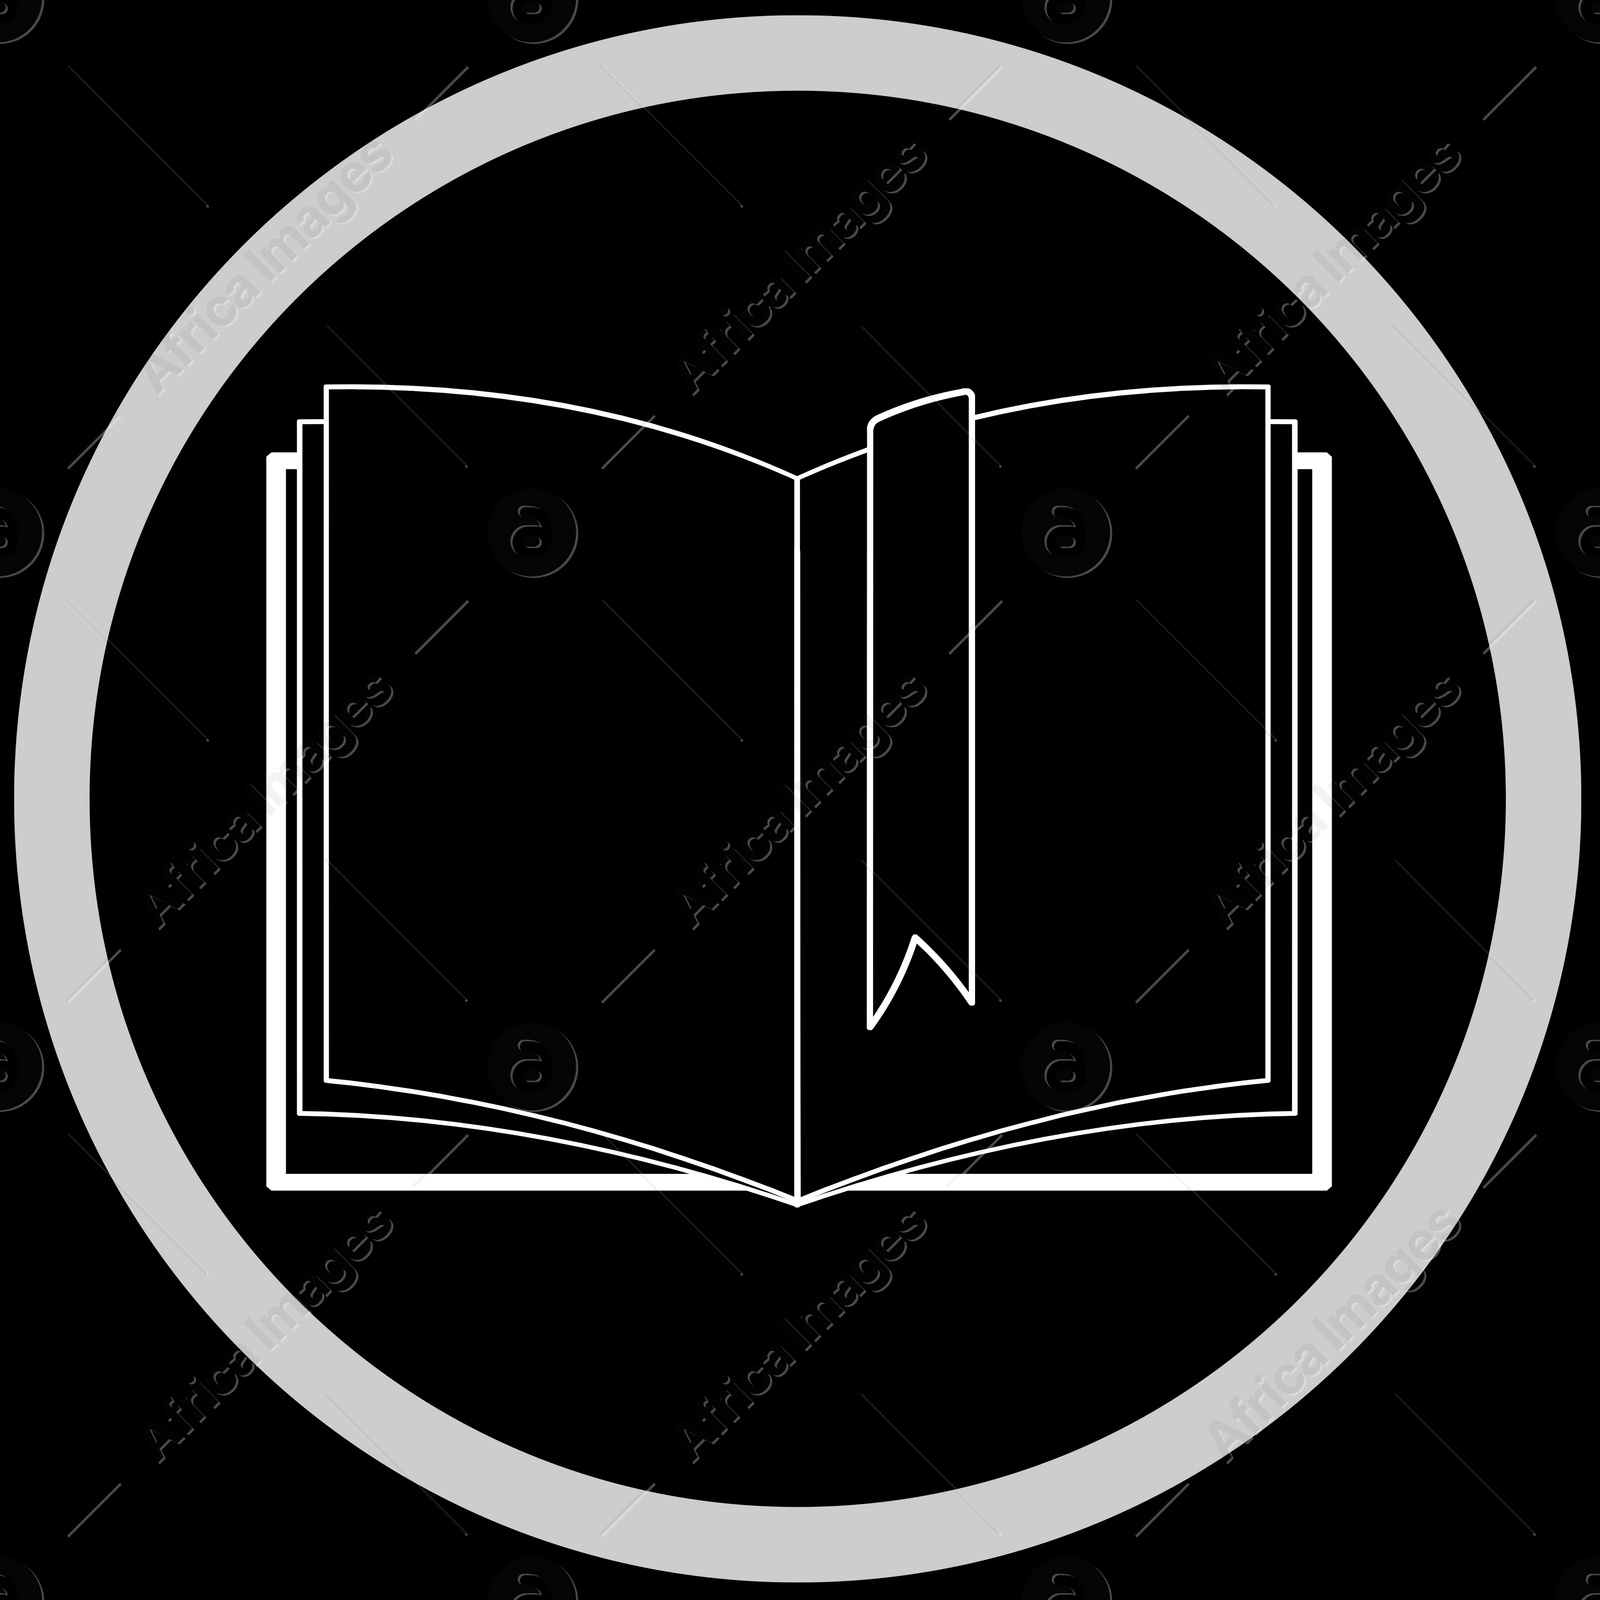 Image of Open book with bookmark in frame, illustration on black background